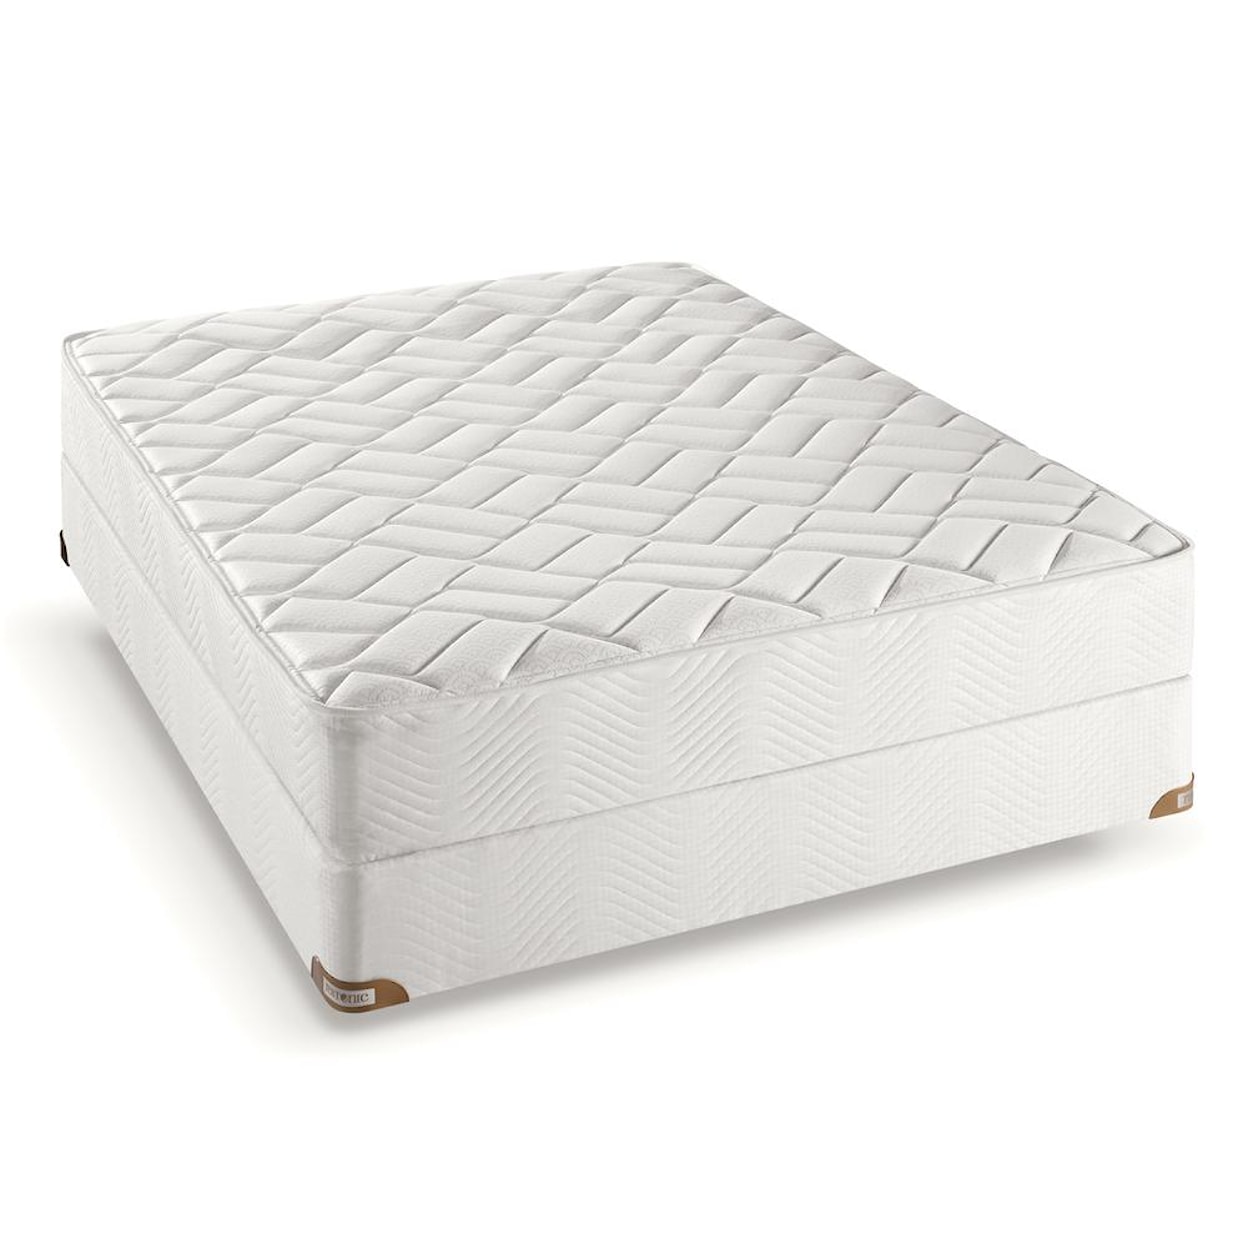 Upper Midwest Bedding- Restonic Comfort Care Beacon Hill Firm